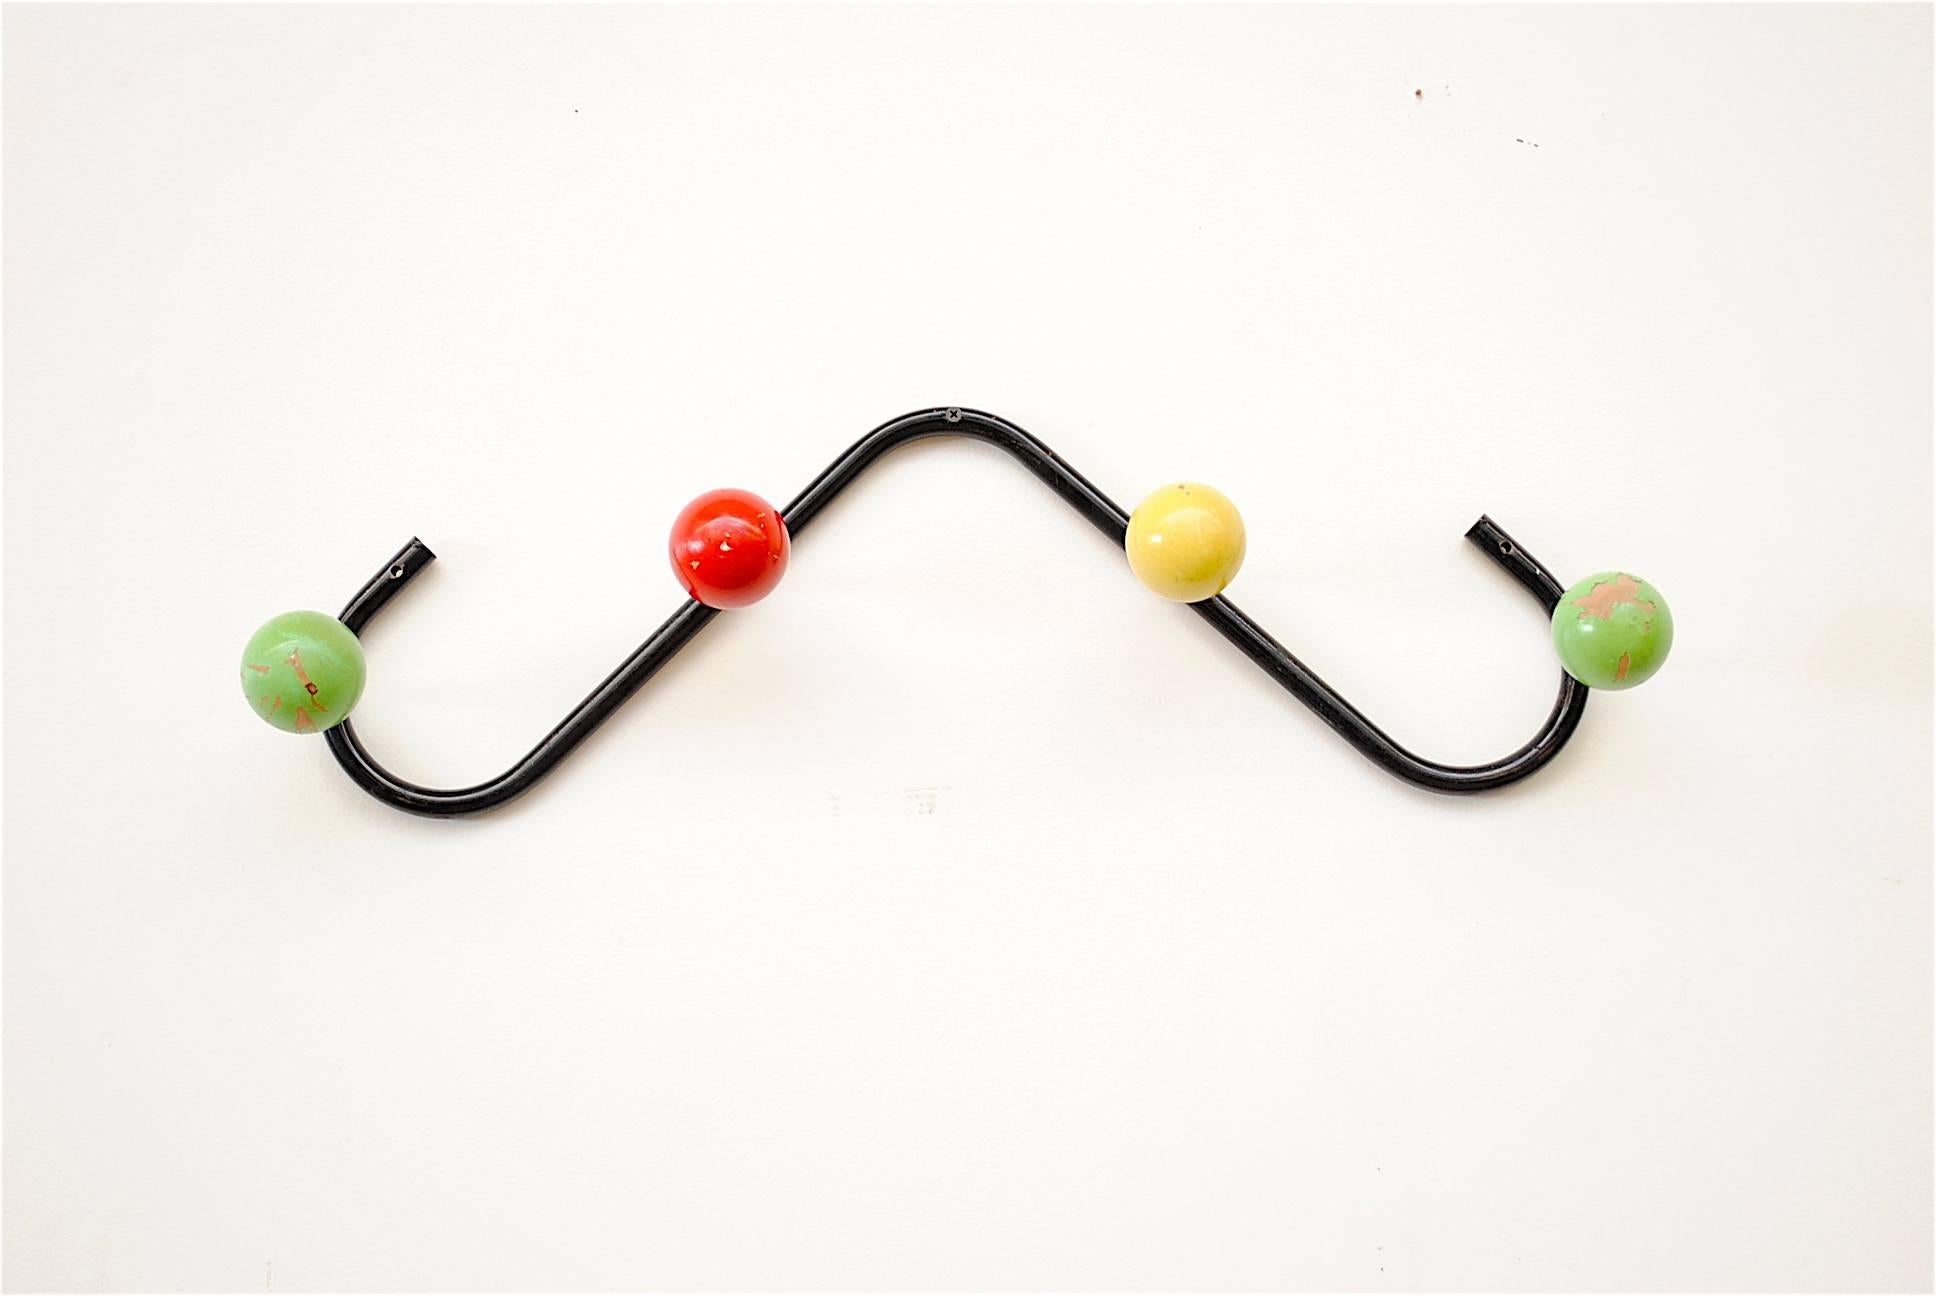 Black enameled metal wall-mounted coat rack with whimsical multicolored wood ball hooks in green red and yellow. Frame and wood have visible wear with clear paint loss.